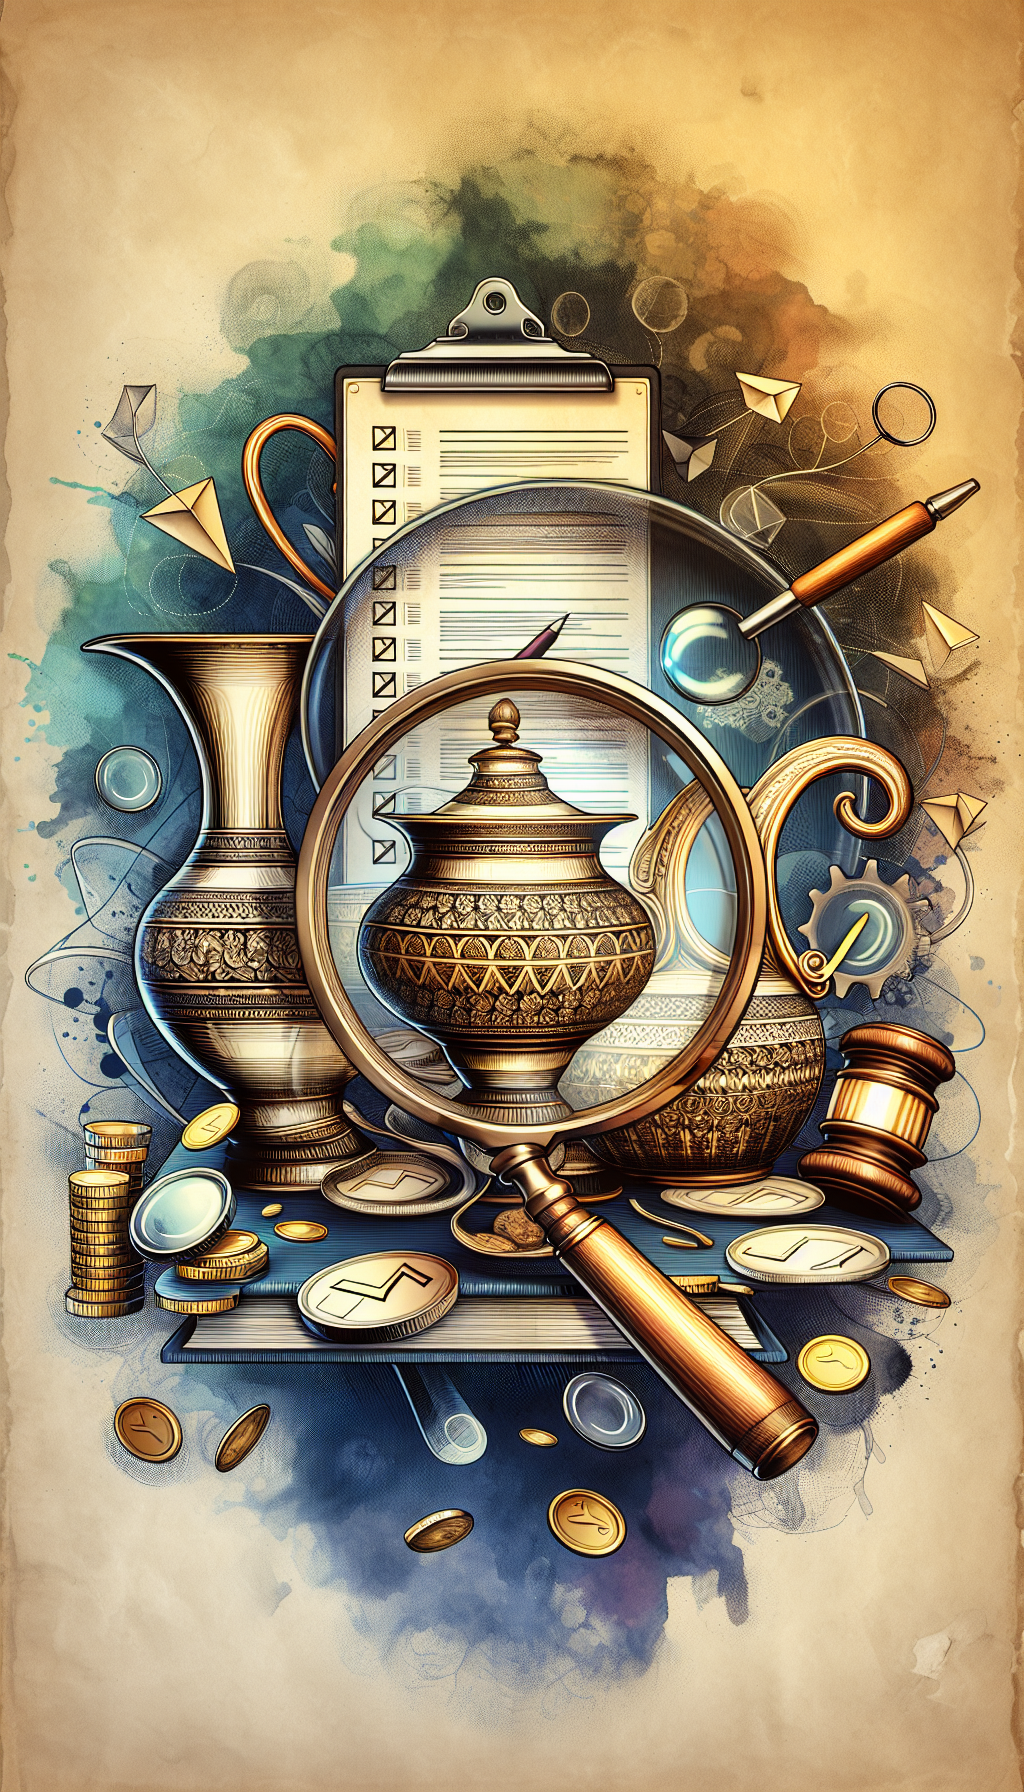 An illustration displaying an ornate, translucent overlay of a collector's magnifying glass centering on the intricate hallmark of an antique wash basin and pitcher set, highlighting its authenticity. Surrounding the focal point, a checklist hovers with golden checkmarks while coins and an auction hammer subtly emphasize the value aspect. The background shifts from a vintage parchment style around the checklist to a vibrant watercolor at the edges, symbolizing the blend of history and worth.